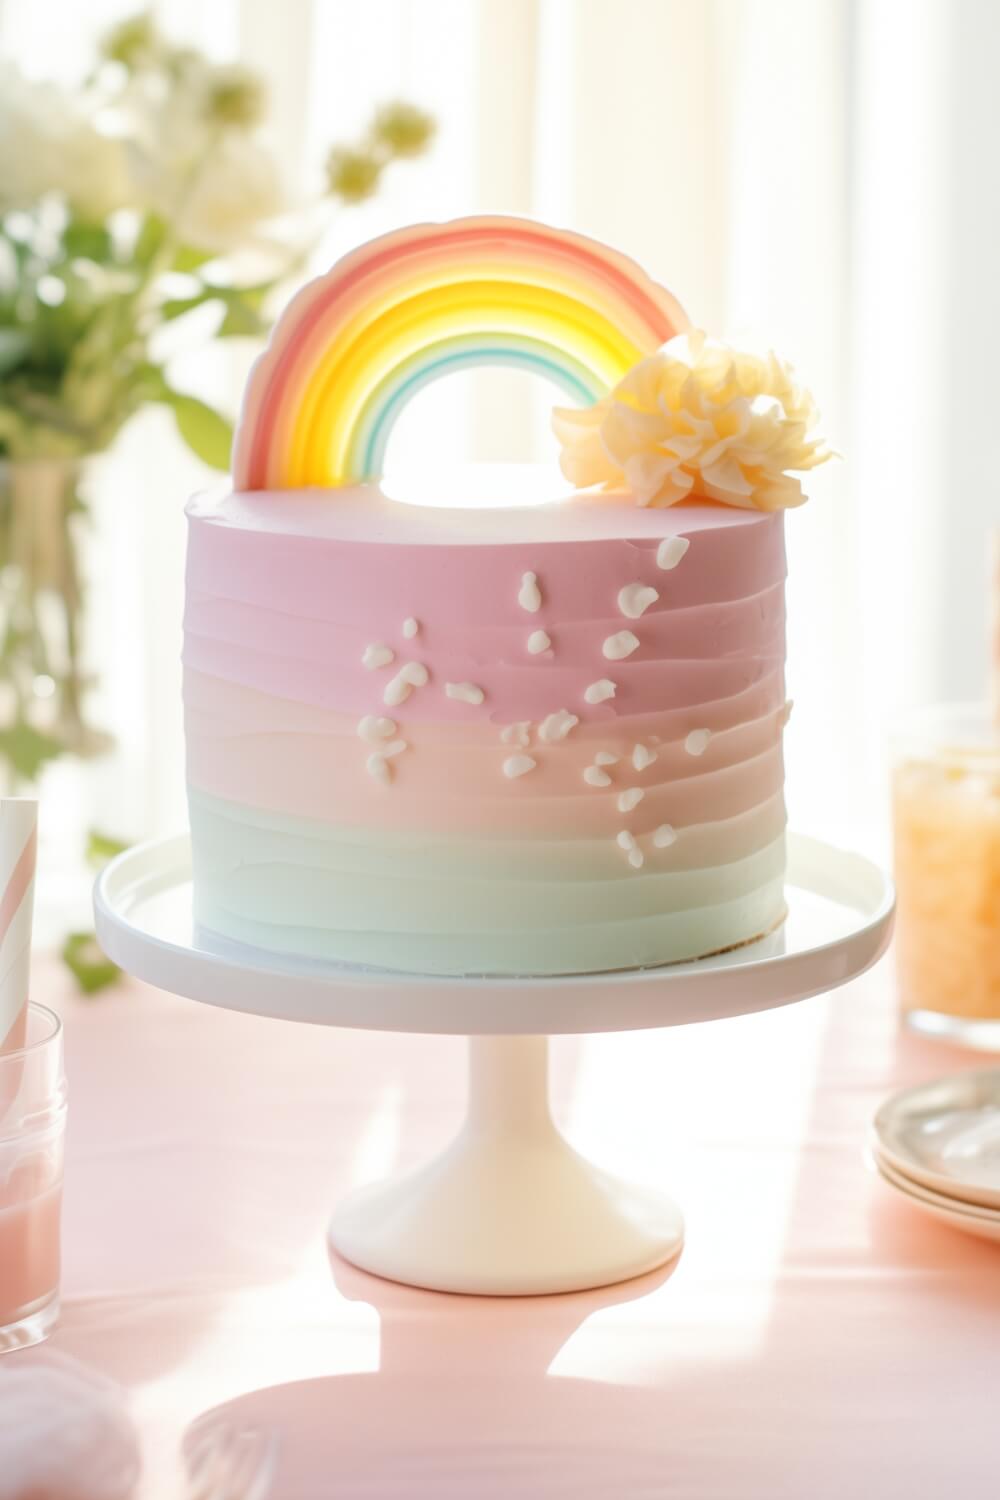 what to put on a baby shower cake-rainbow cake topper